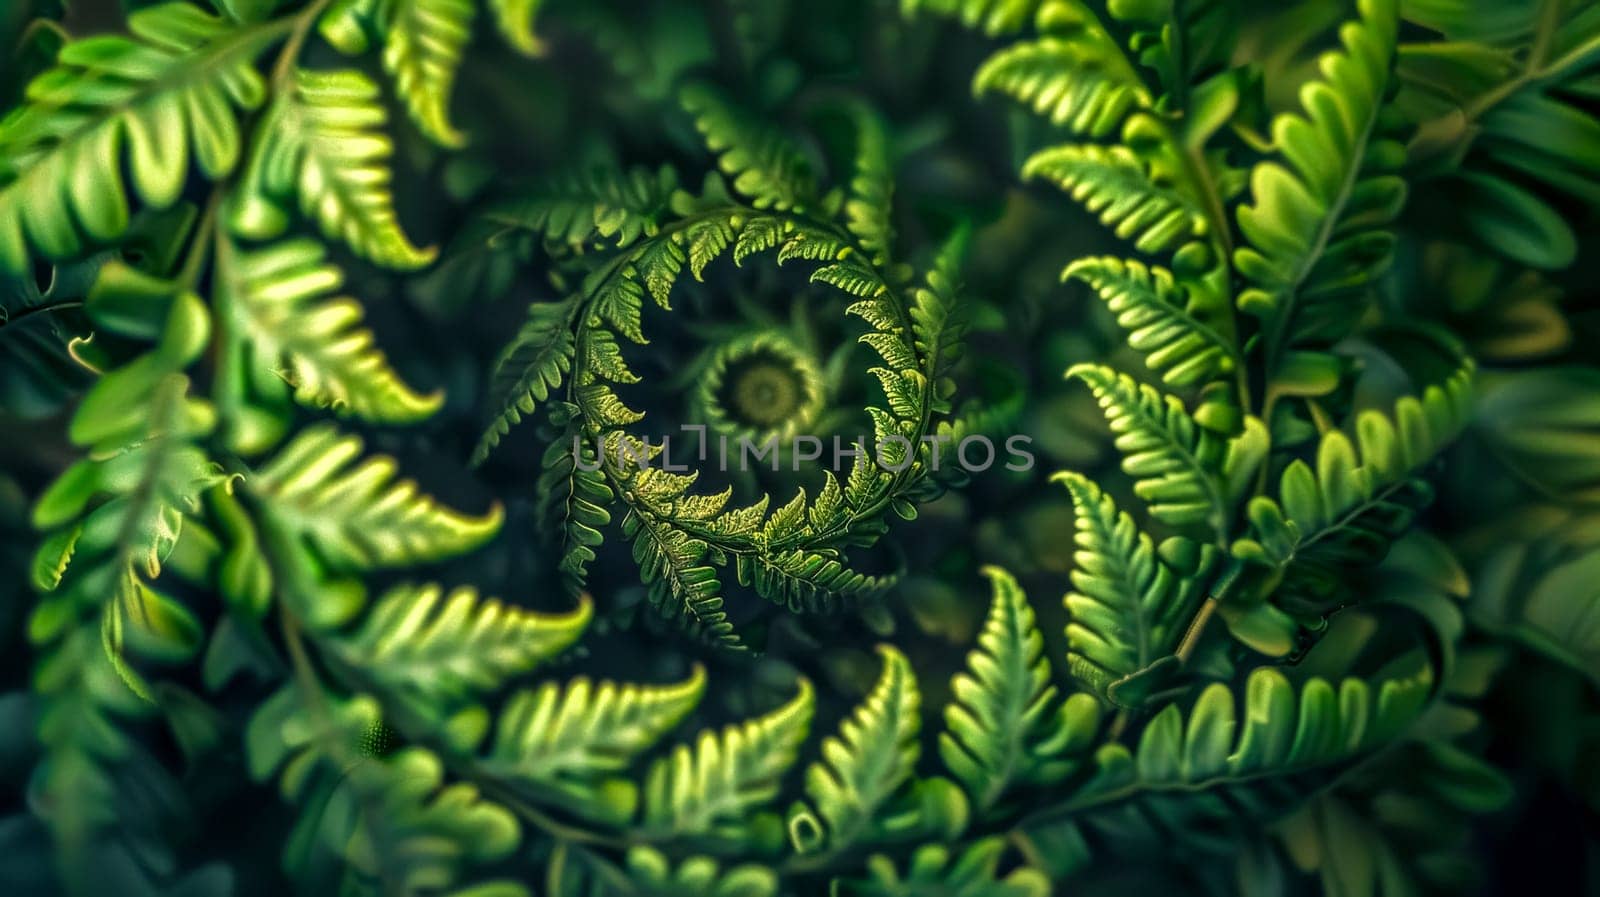 Mesmerizing spiral pattern formed by lush green fern leaves by Edophoto